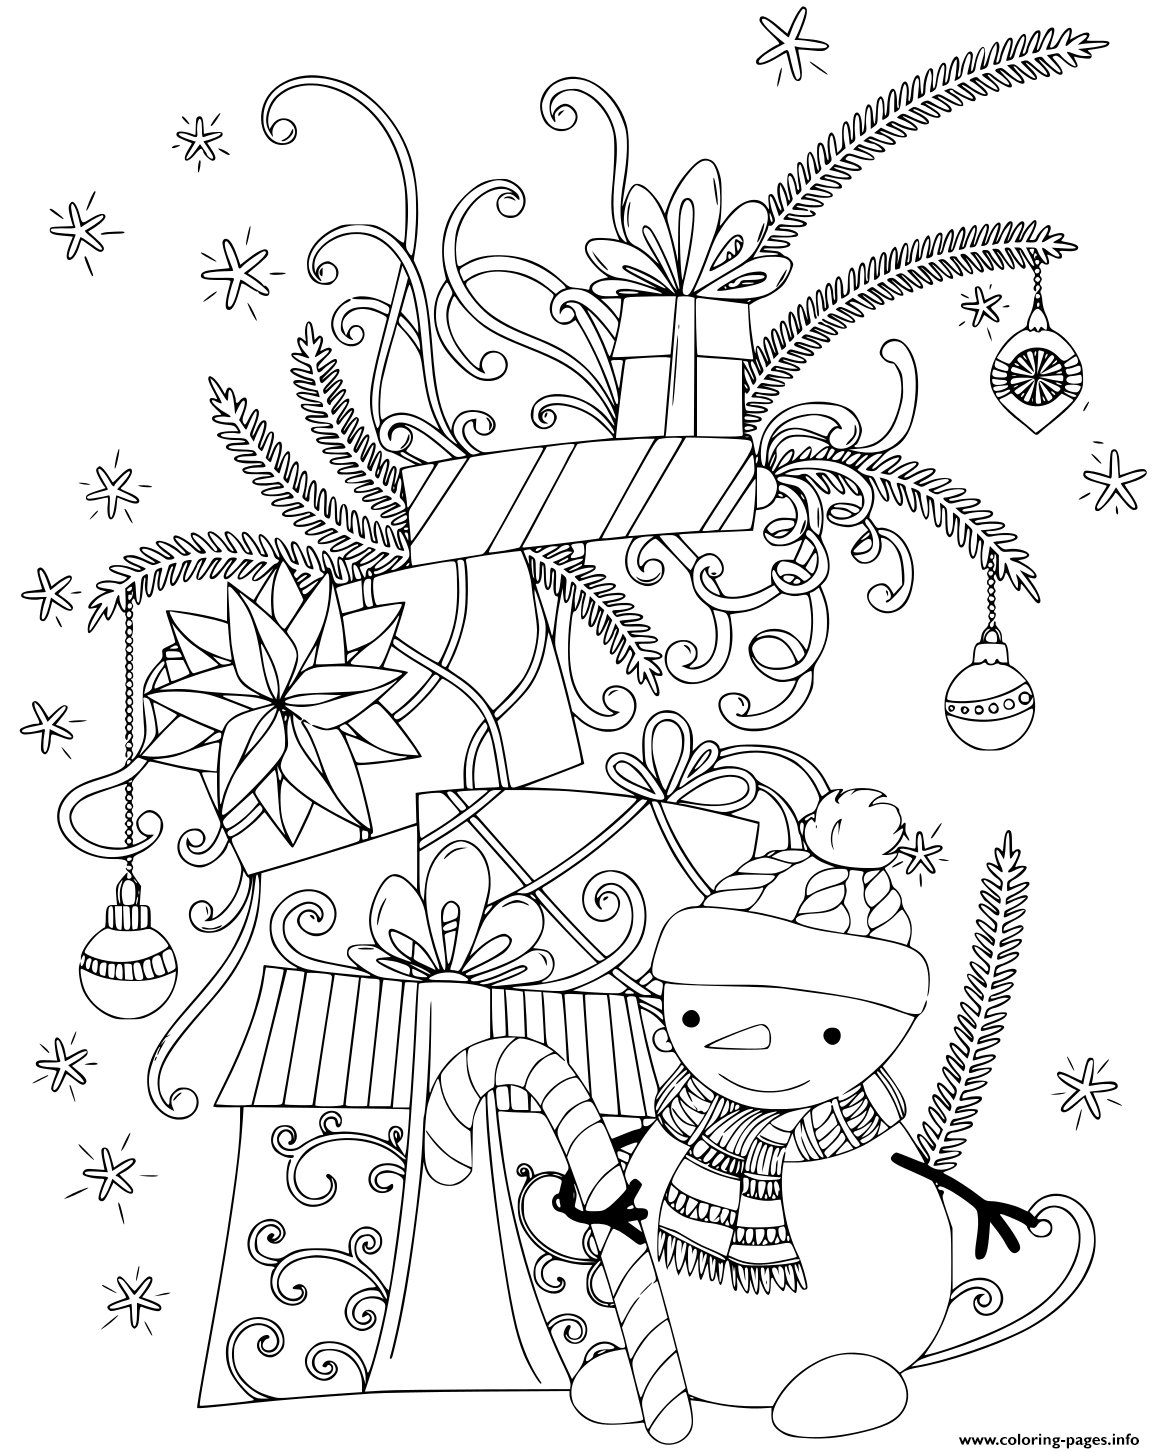 Man Of Snow With Gift Christmas coloring